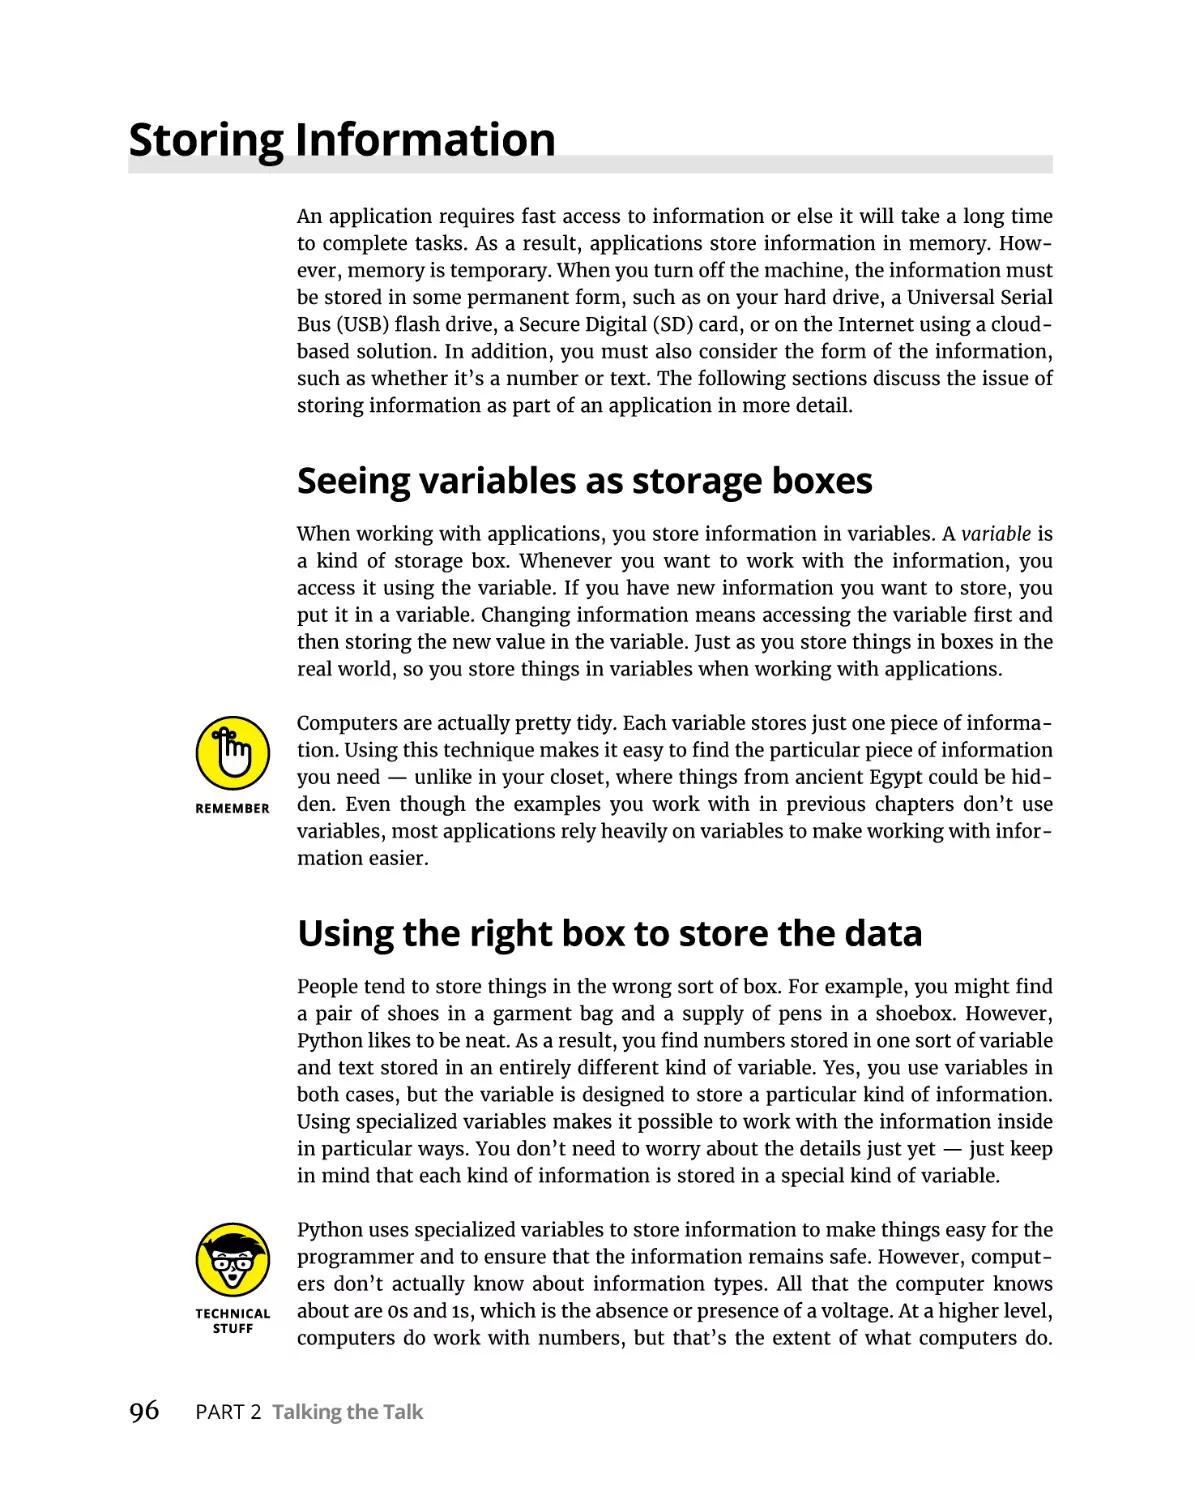 Storing Information
Seeing variables as storage boxes
Using the right box to store the data